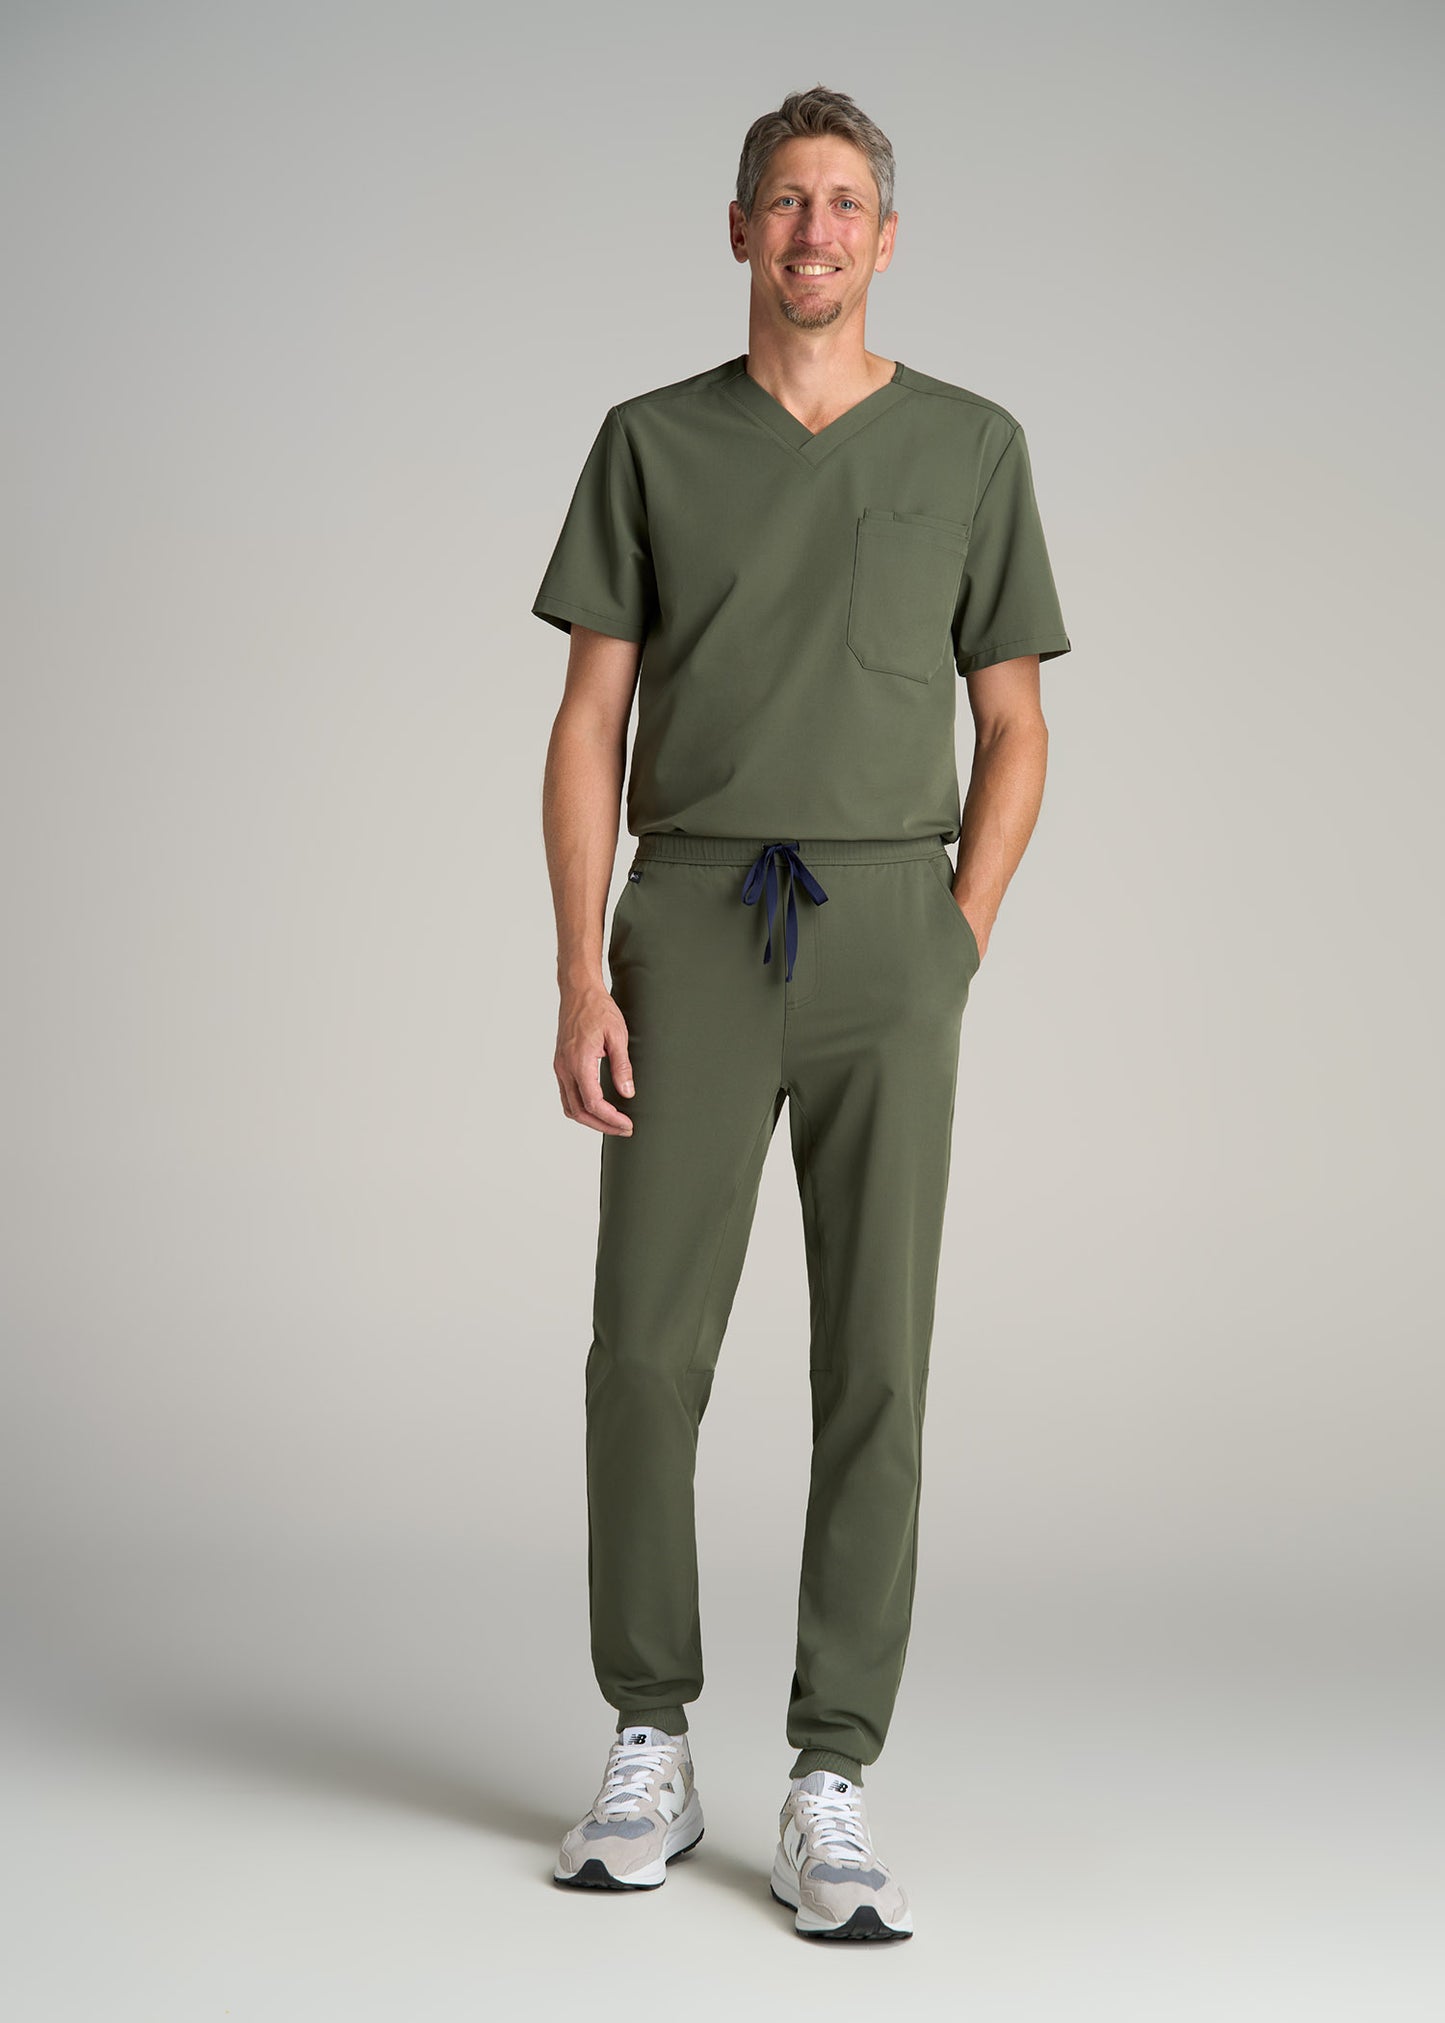 Scrub Joggers for Tall Men in Clover Green